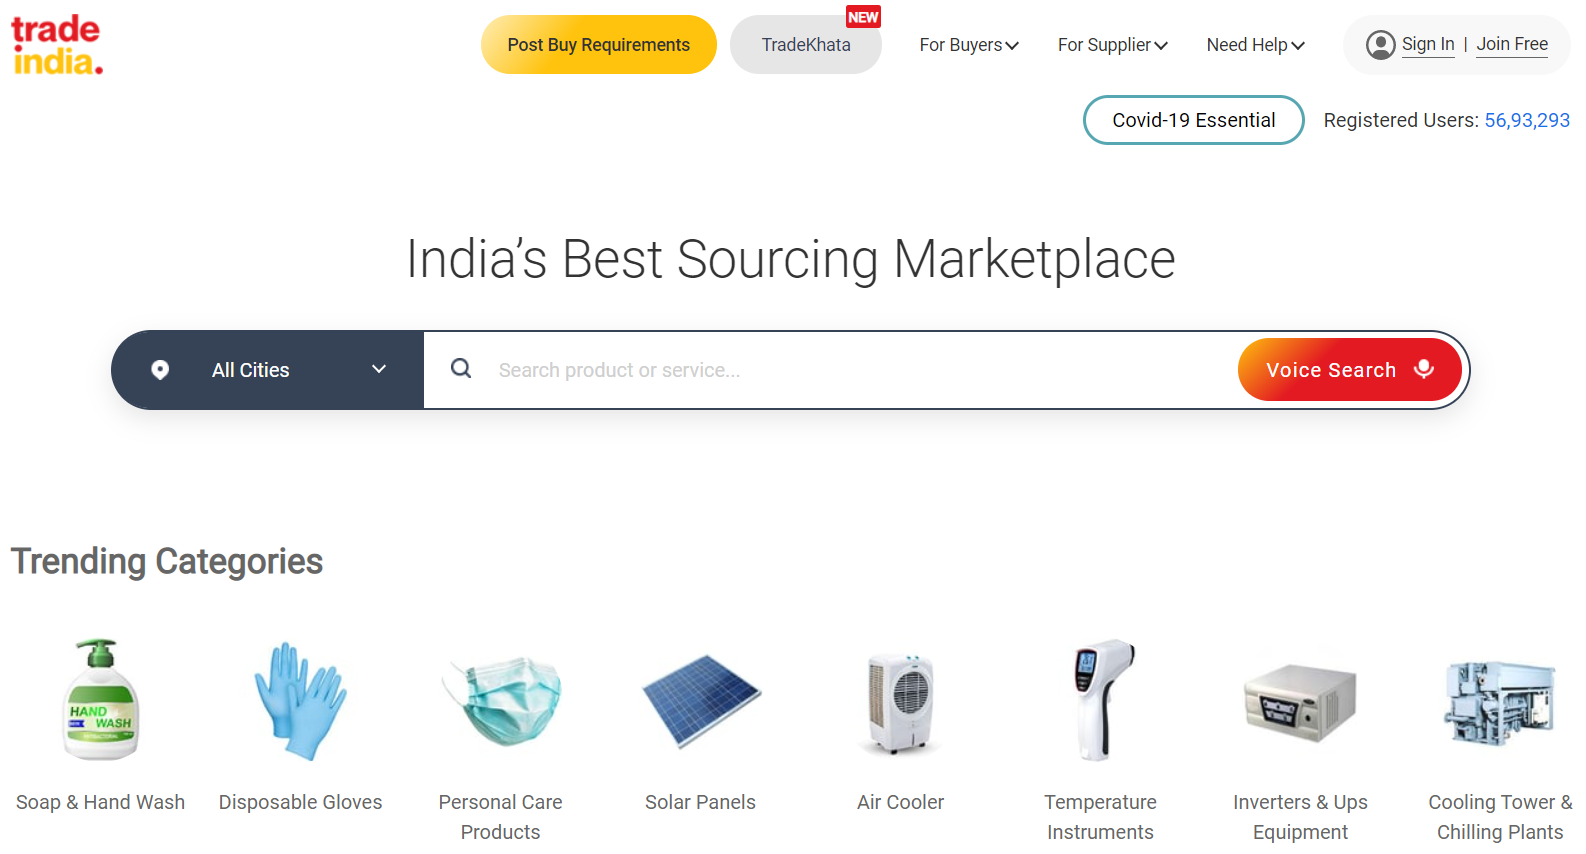 TradeIndia is one of the best sites like Alibaba